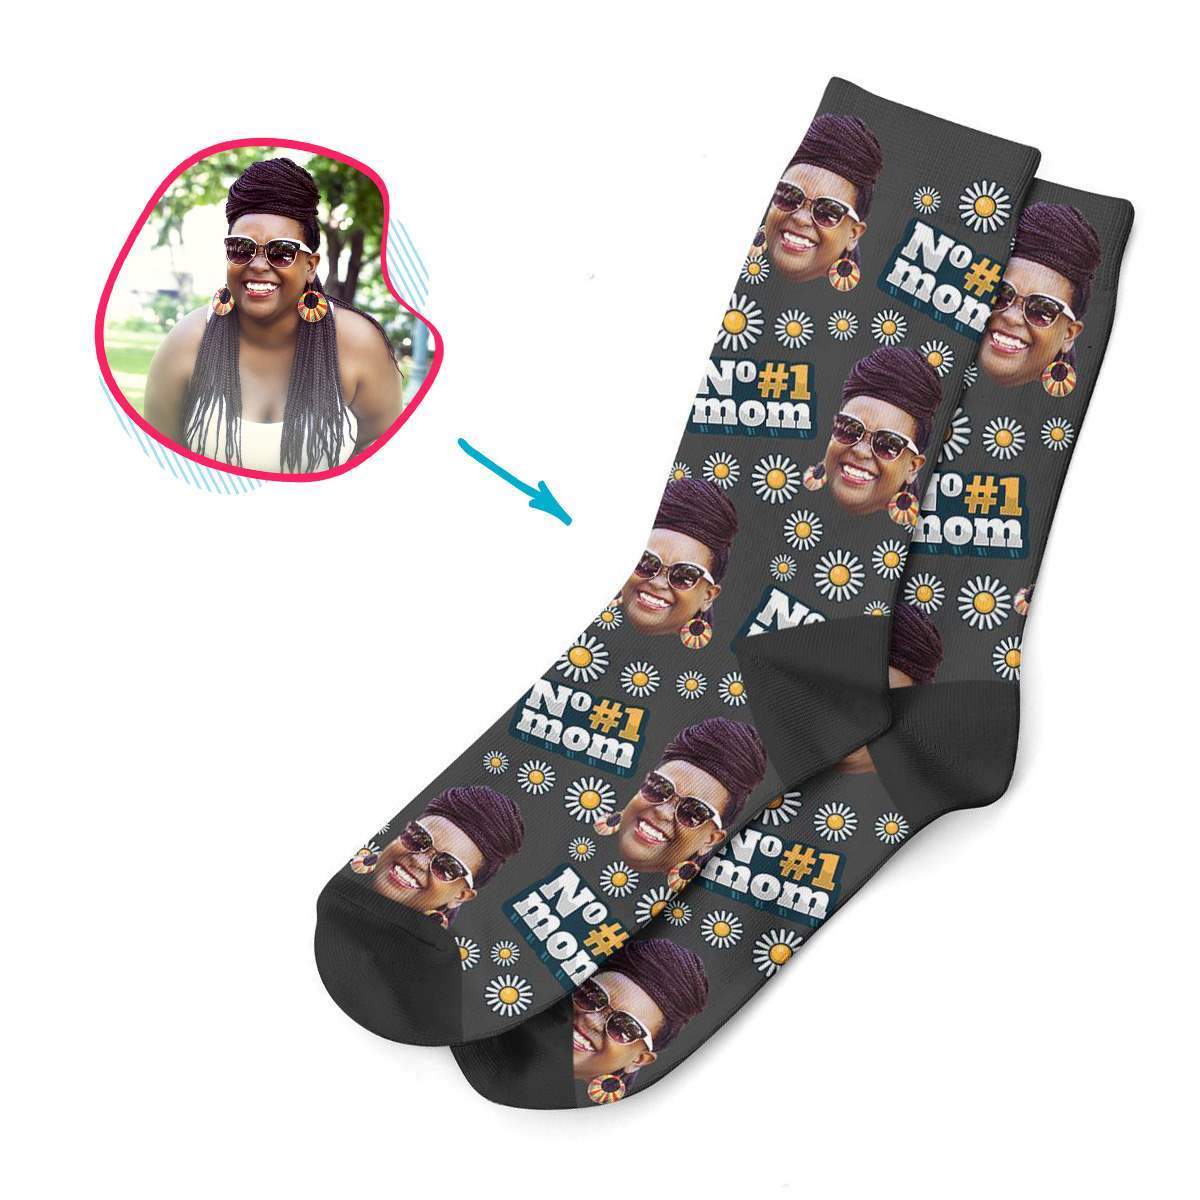 dark #1 Mom socks personalized with photo of face printed on them